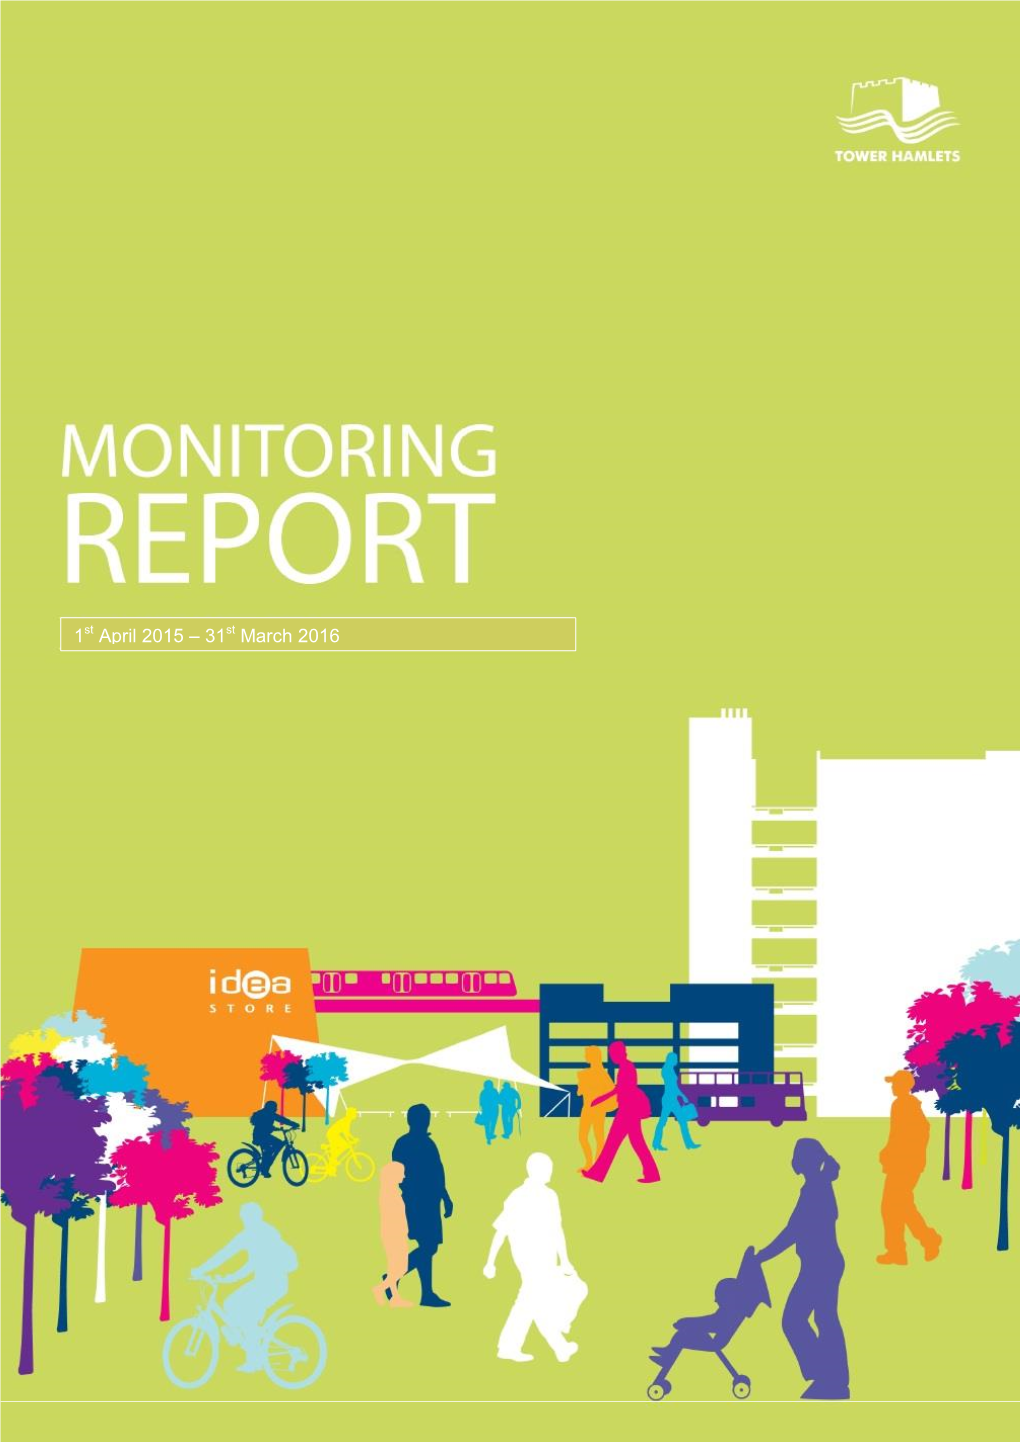 2010/11 Annual Monitoring Report